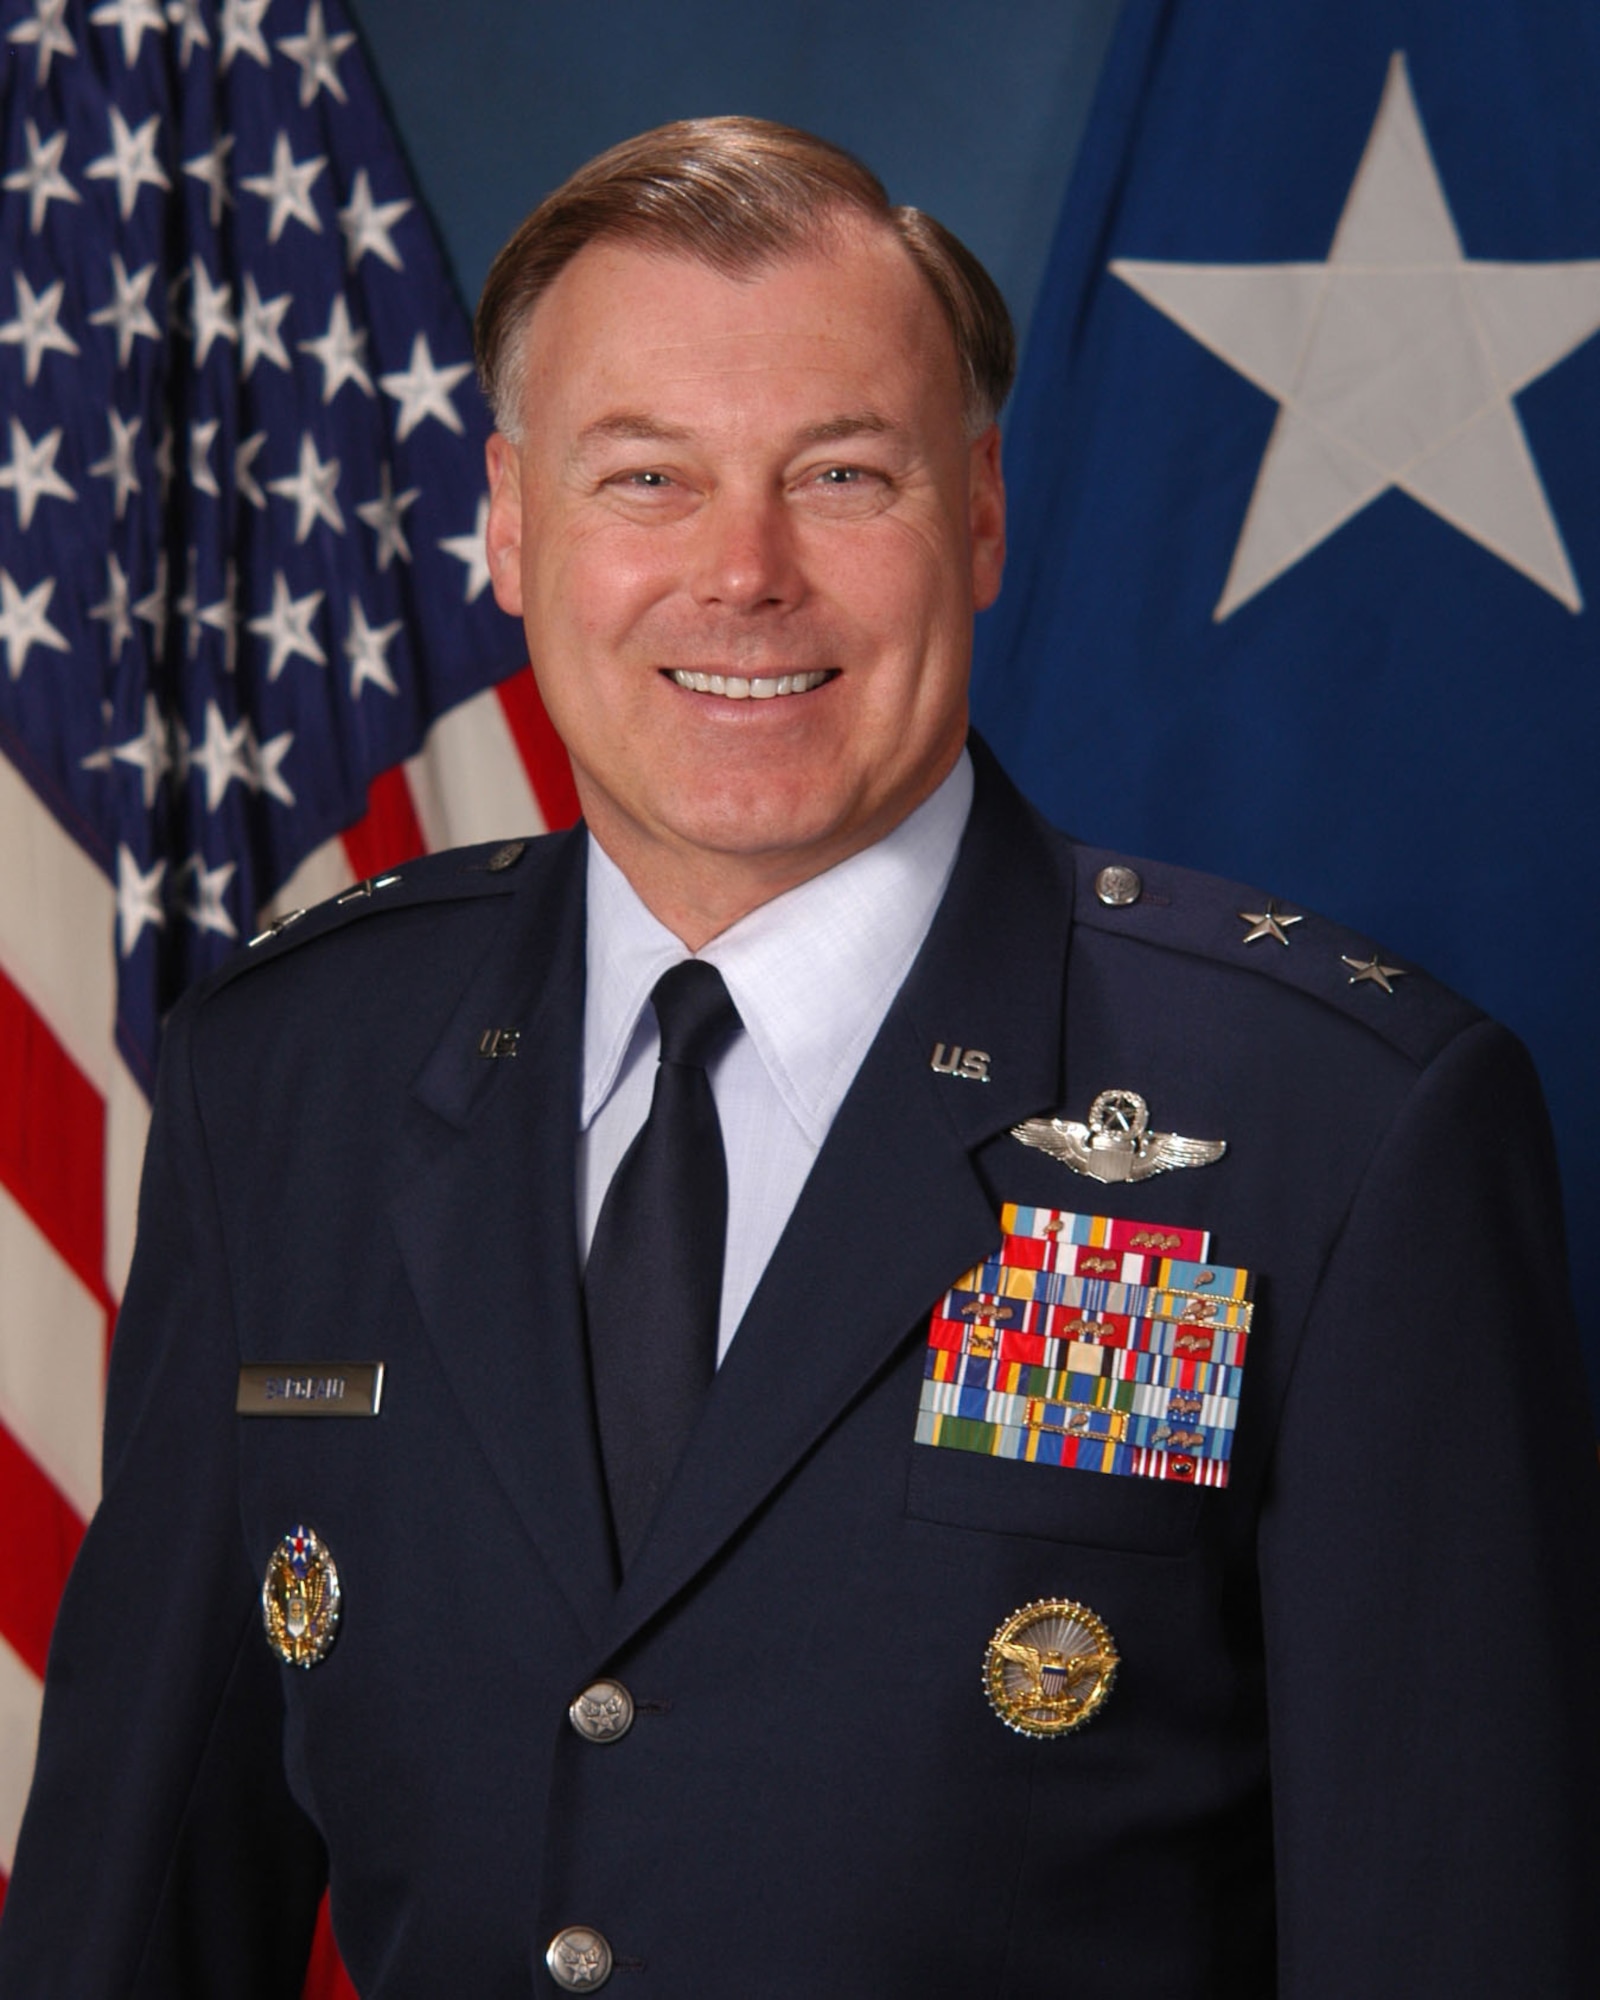 Maj. Gen. Stephen Sargeant, Air Force Operational Test and Evaluation Center Commander, received the 2009 General Thomas D. White U.S. Air Force Space Trophy.